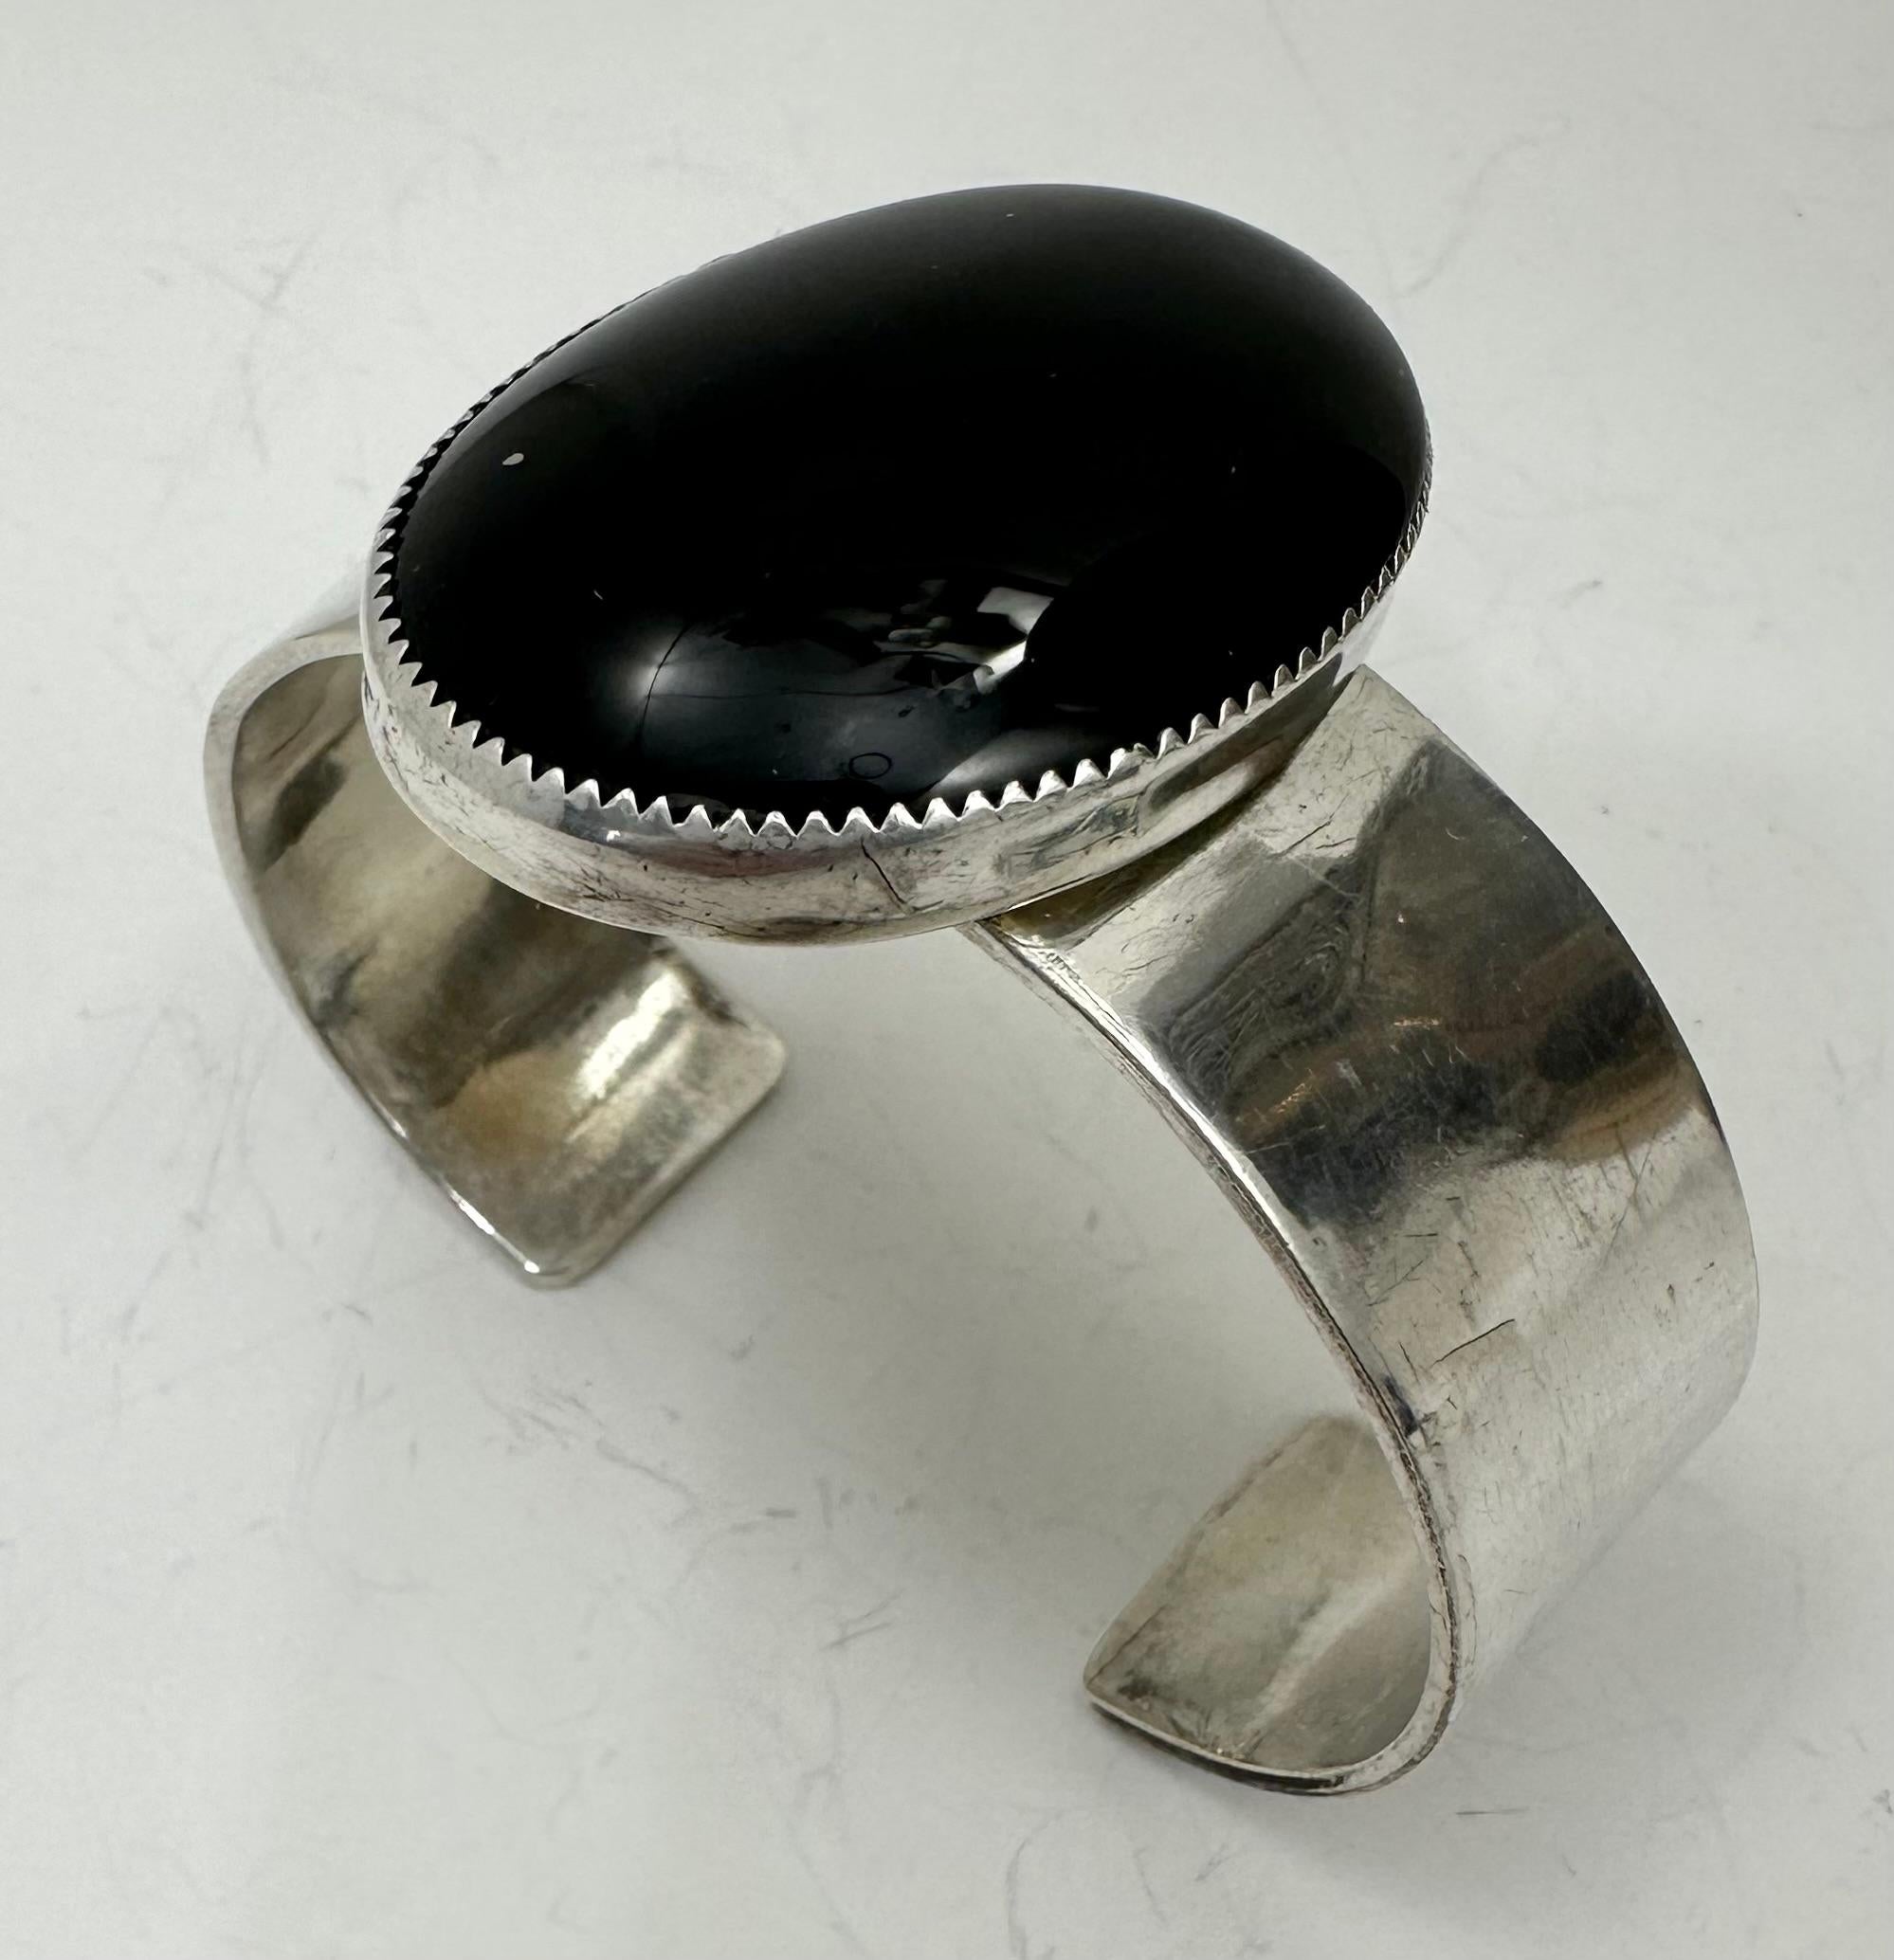 Sterling Silver .925 (30mm x 40mm oval stone) Onyx Cuff Bracelet Signed by Navajo Artist R Henry

History of Black Onyx:
Black Onyx has a rich history dating back thousands of years. Ancient cultures like the Egyptians, Greeks, and Romans held it in